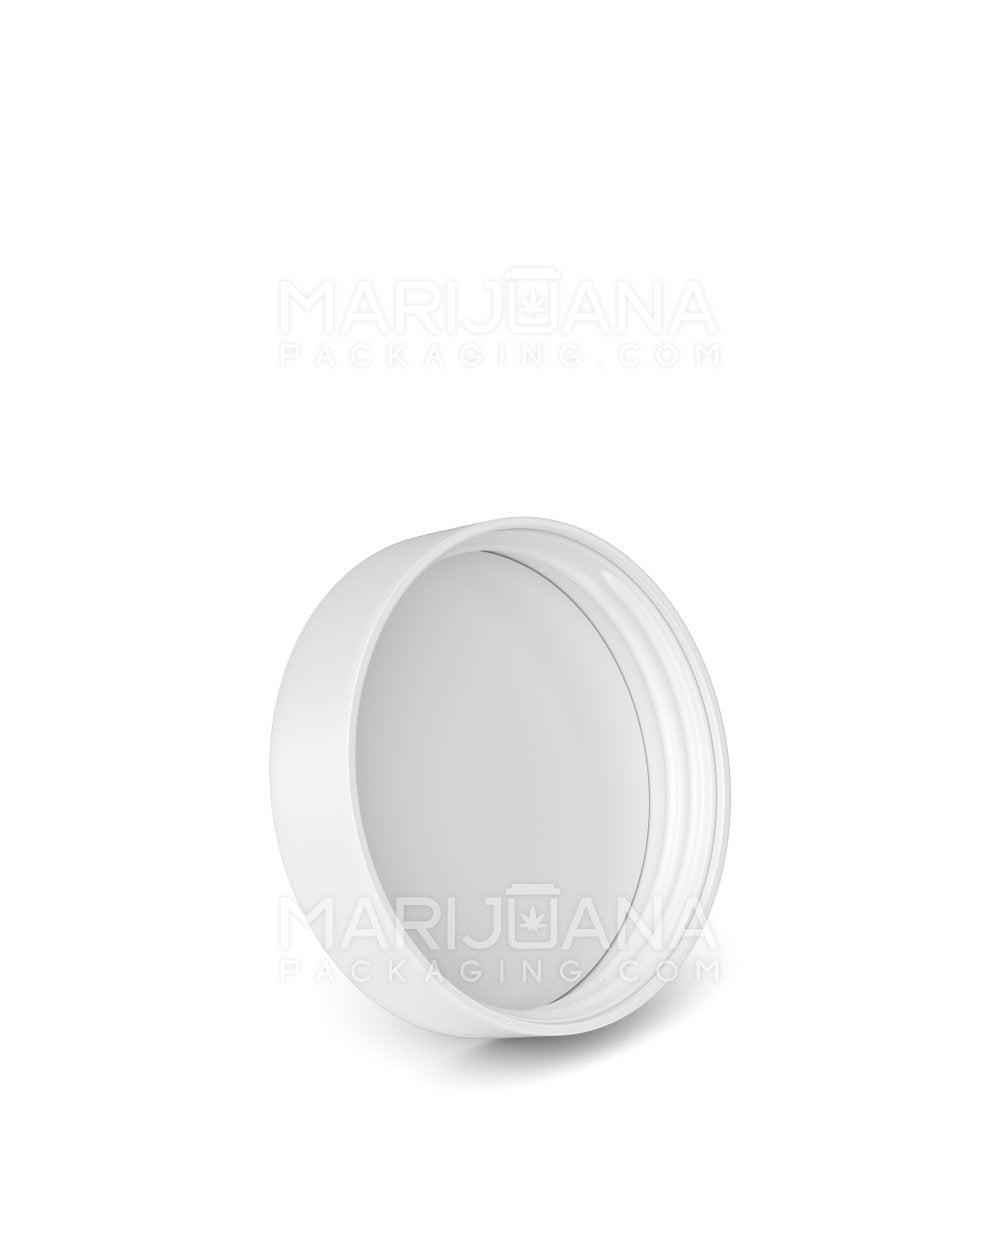 Child Resistant Smooth Flat Push Down & Turn Plastic Caps w/ Text & Foam Liner | 48mm - Matte White | Sample - 2